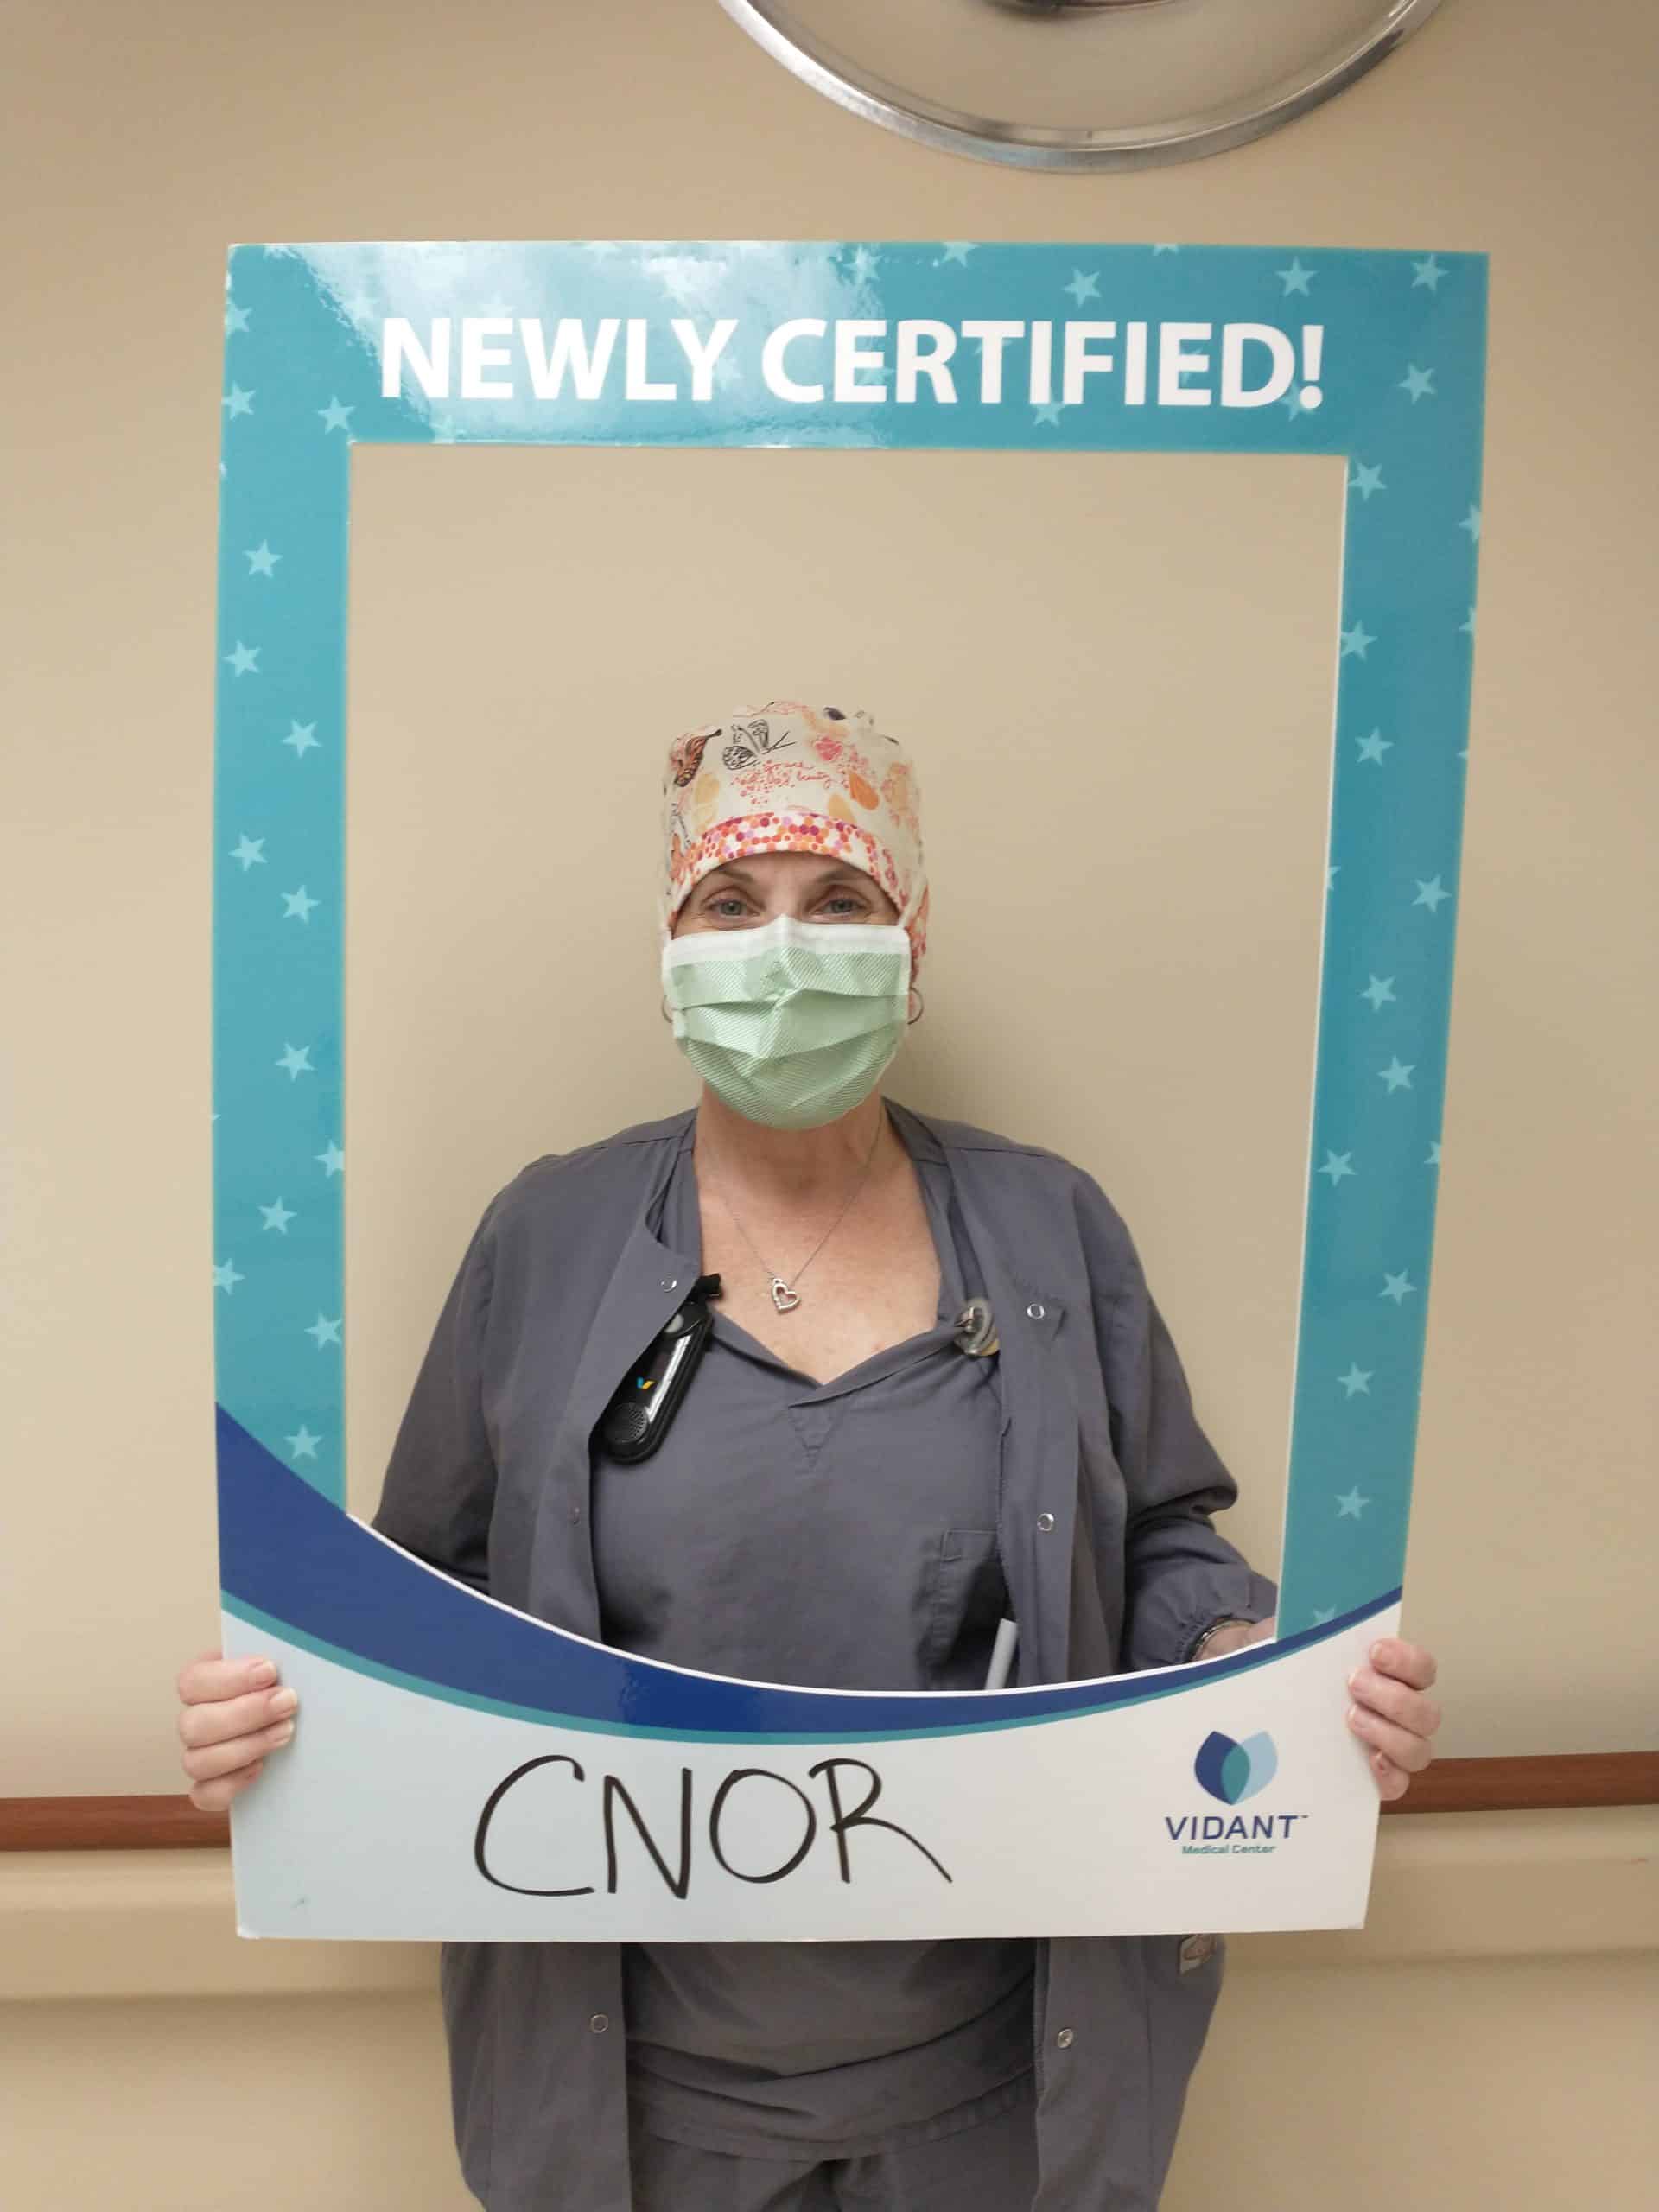 Kelly Giordano, BSN, RN, CNOR work in the operating room and received her certified nurse of OR certifications